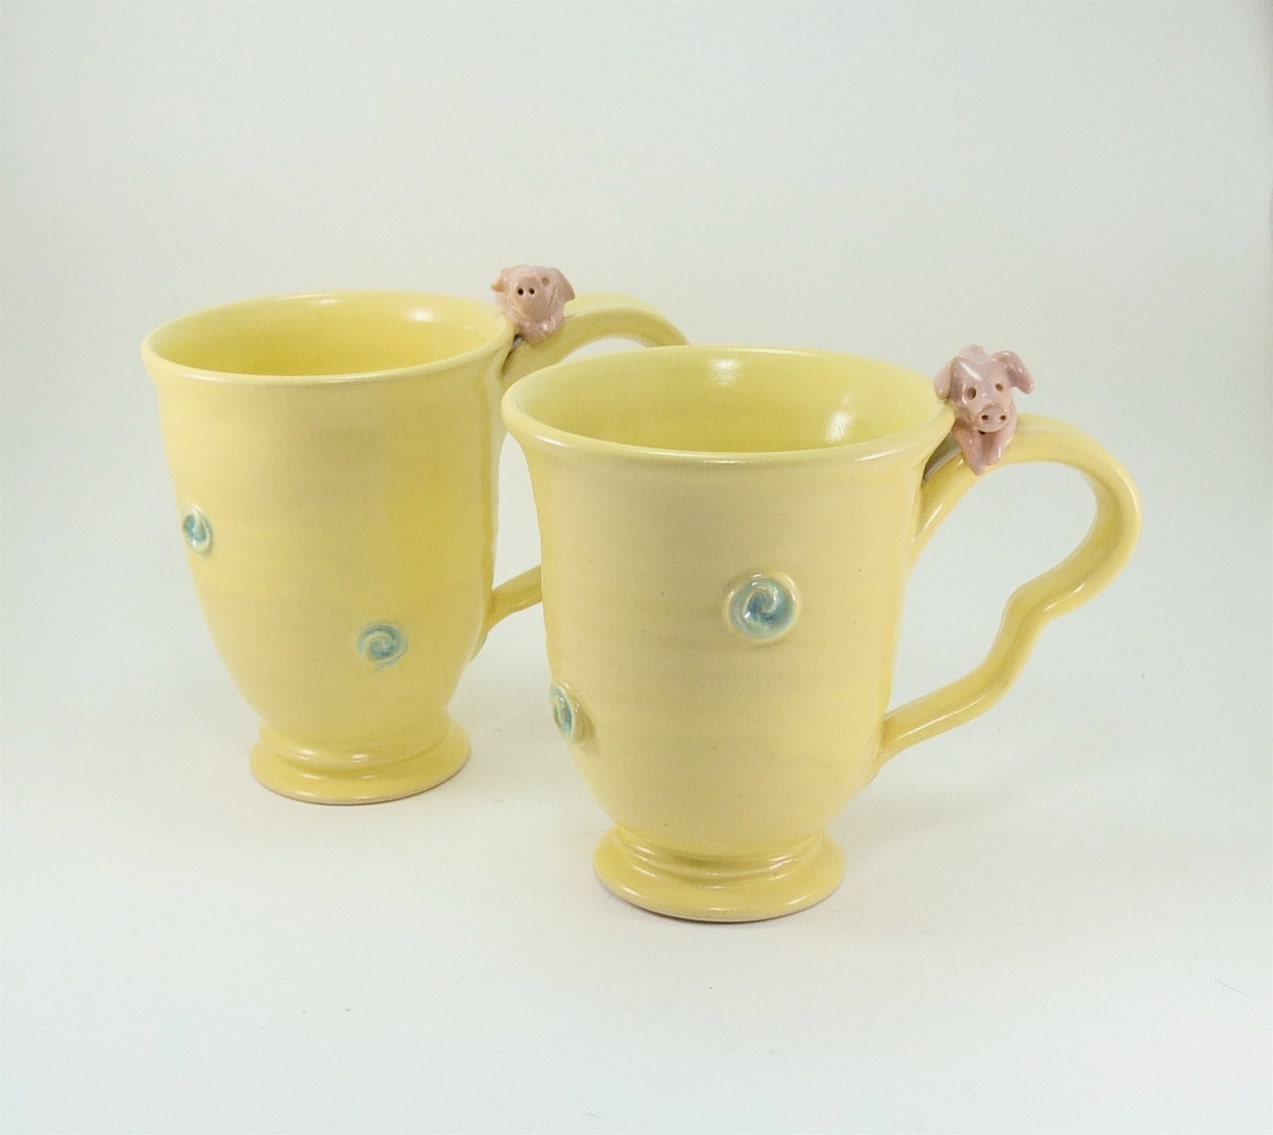 awesome pair of yellow piggy mugs